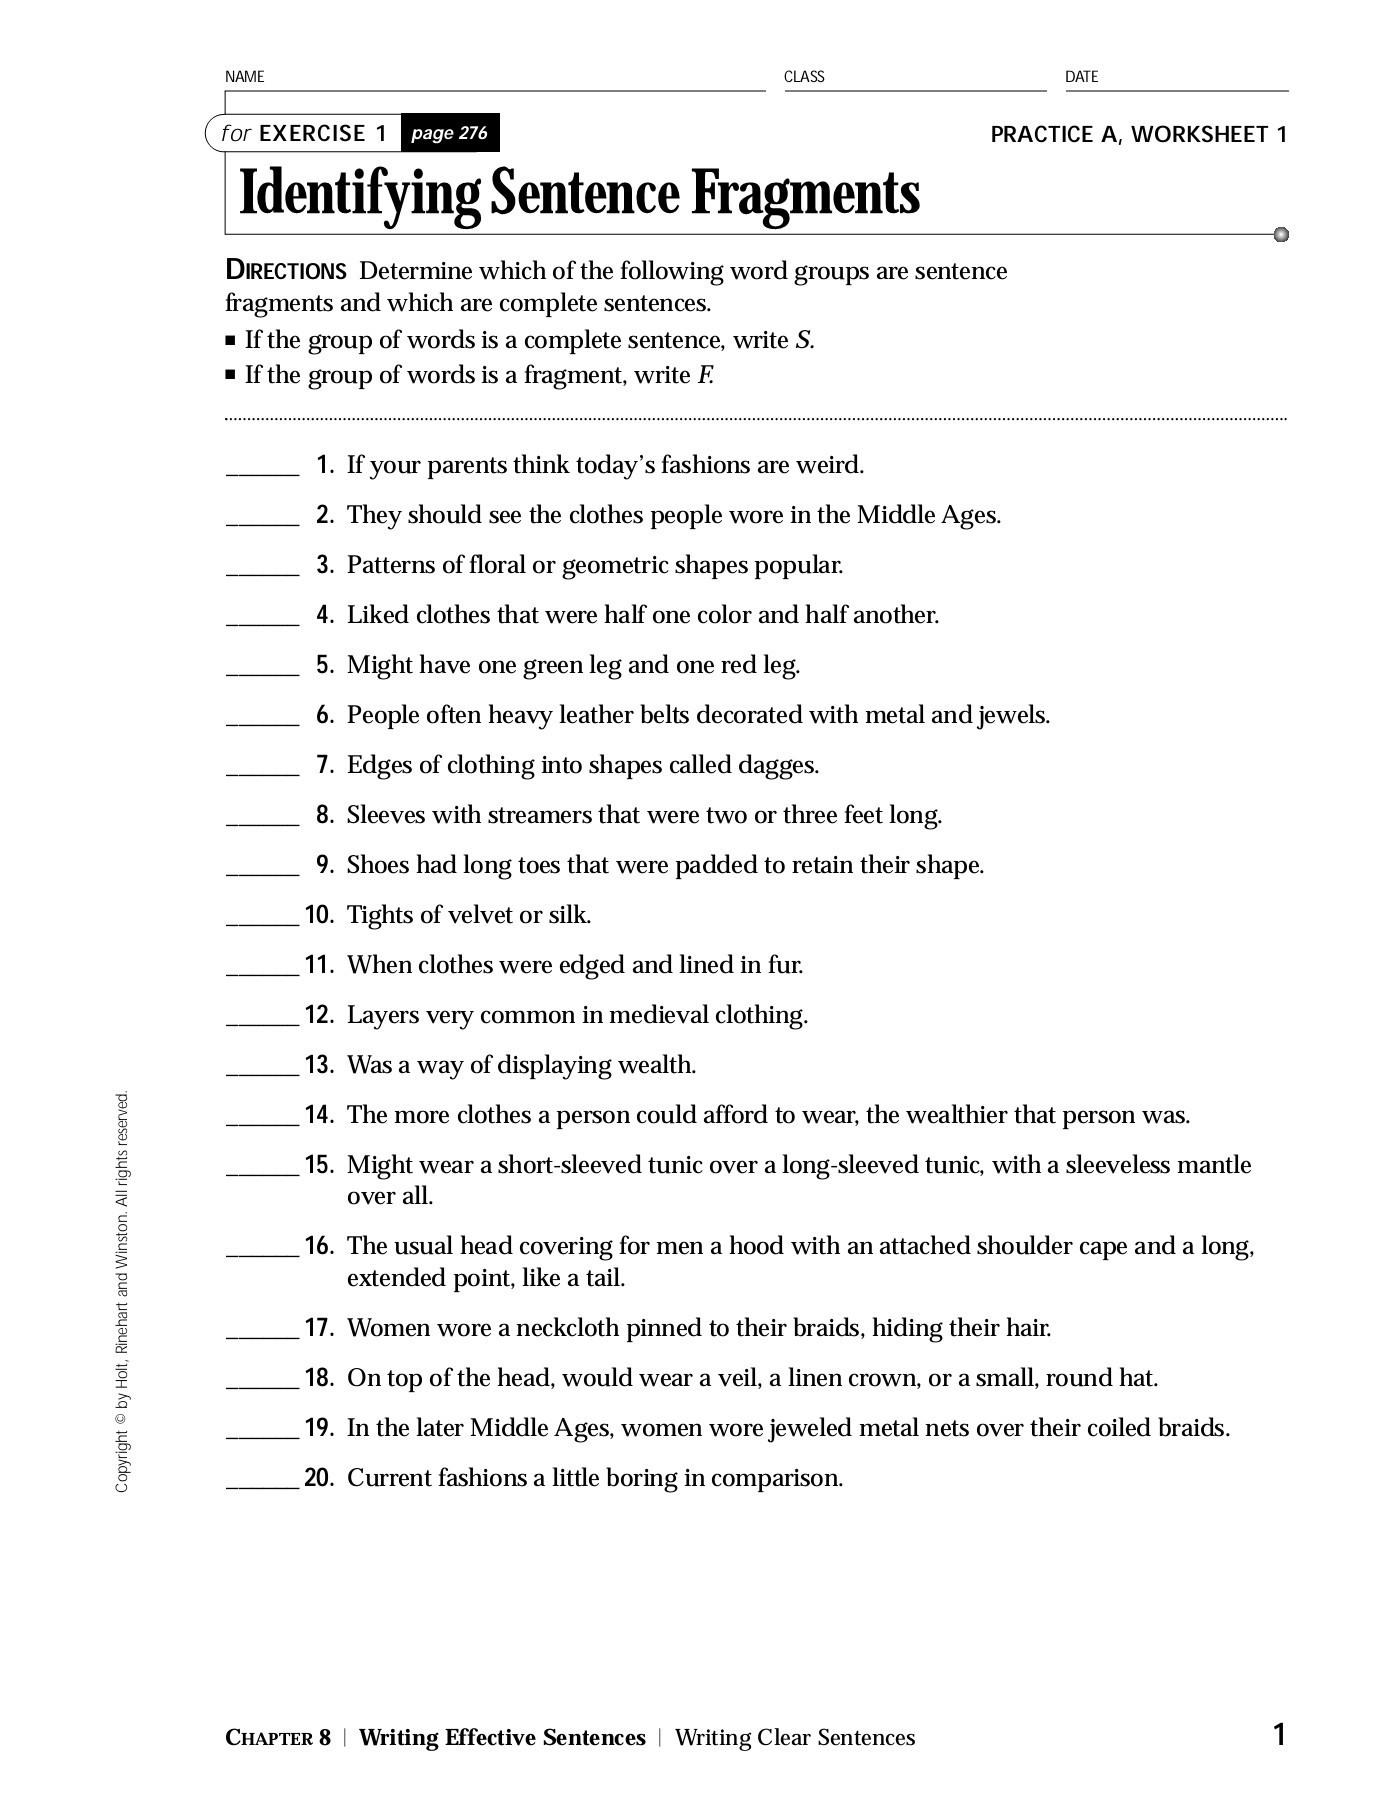 Sentences And Sentence Fragments Worksheet Answers